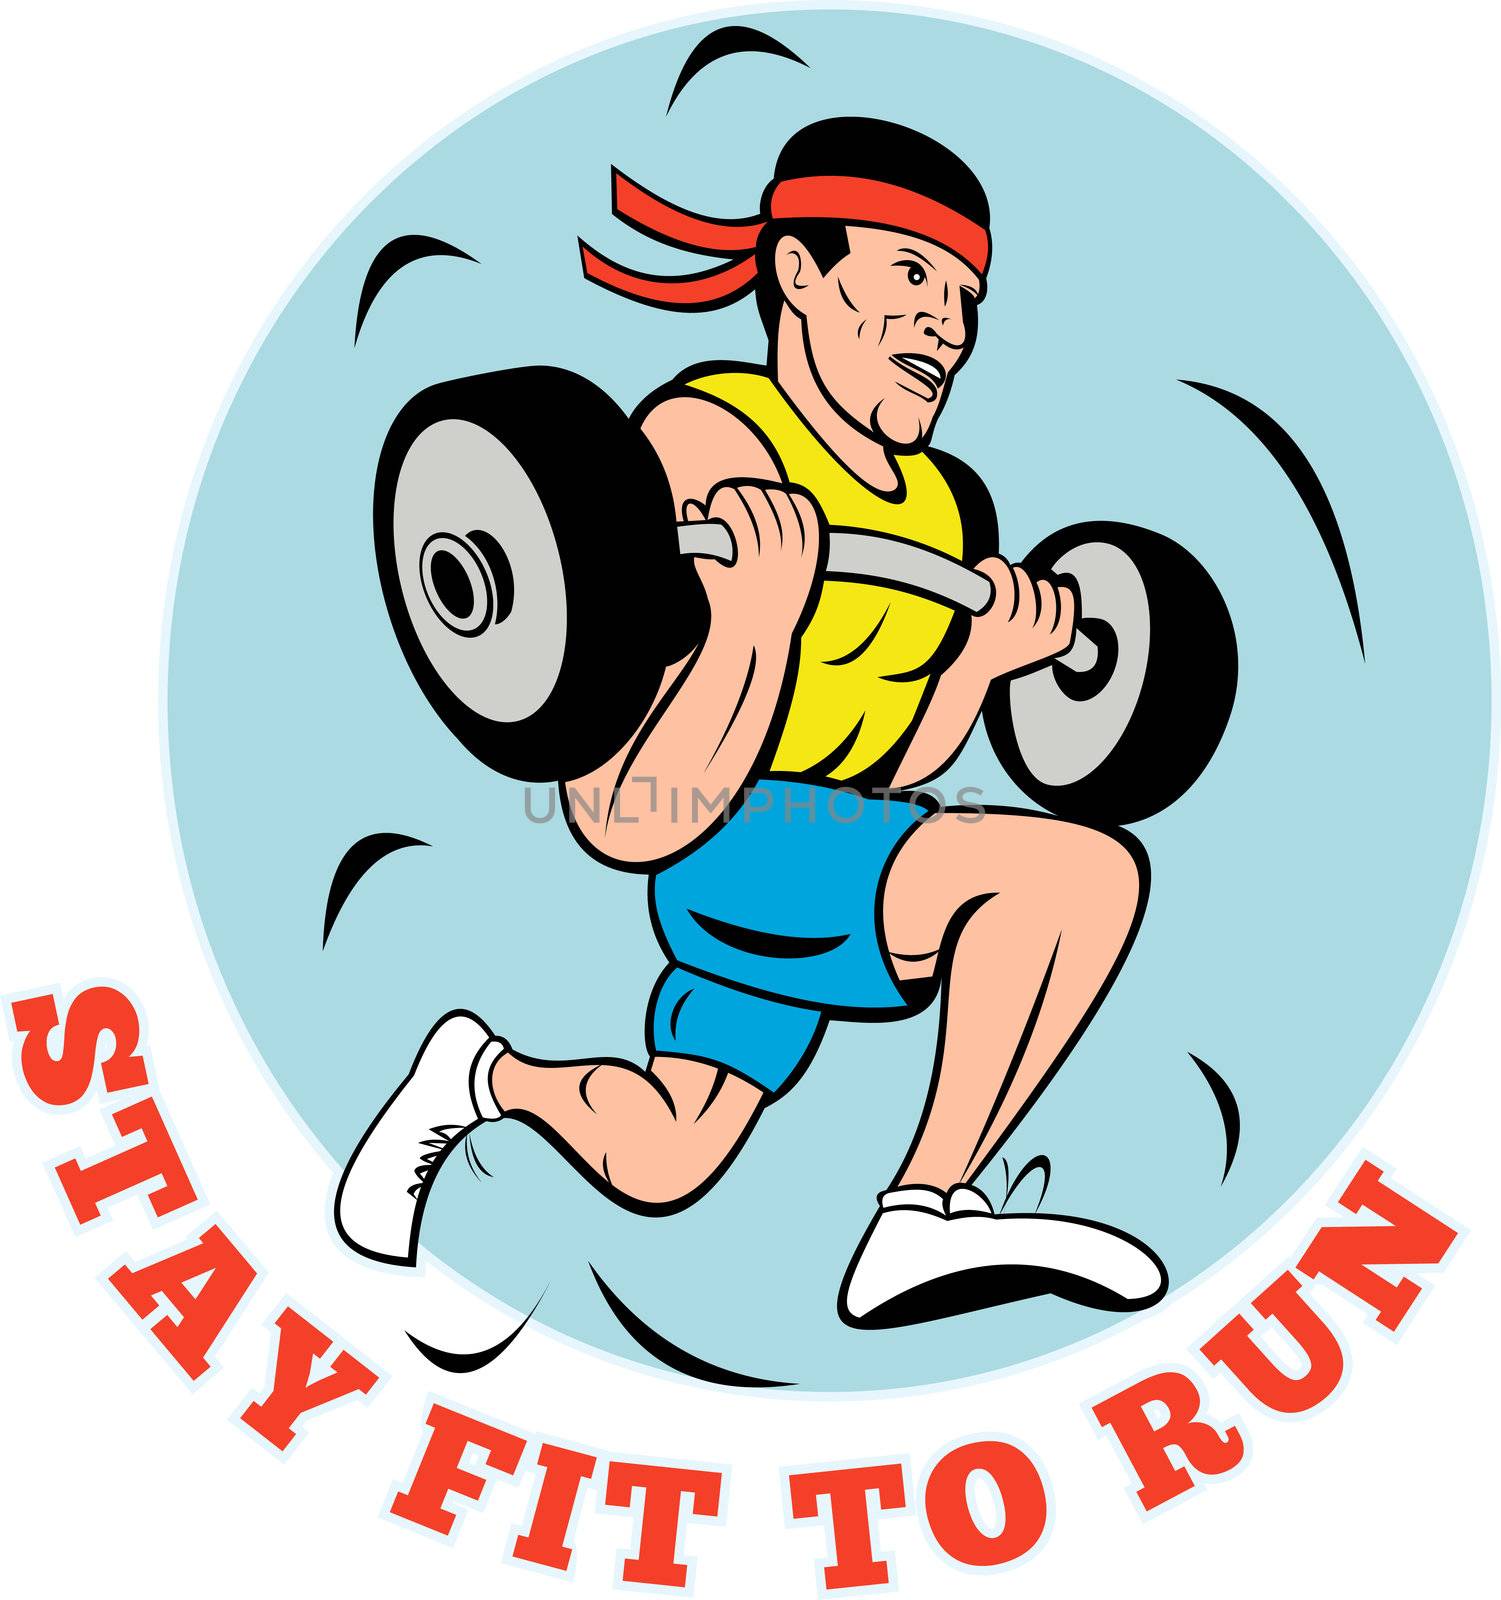 cartoon illustration of a Man running jogging lifting weights with text "stay fit to run"